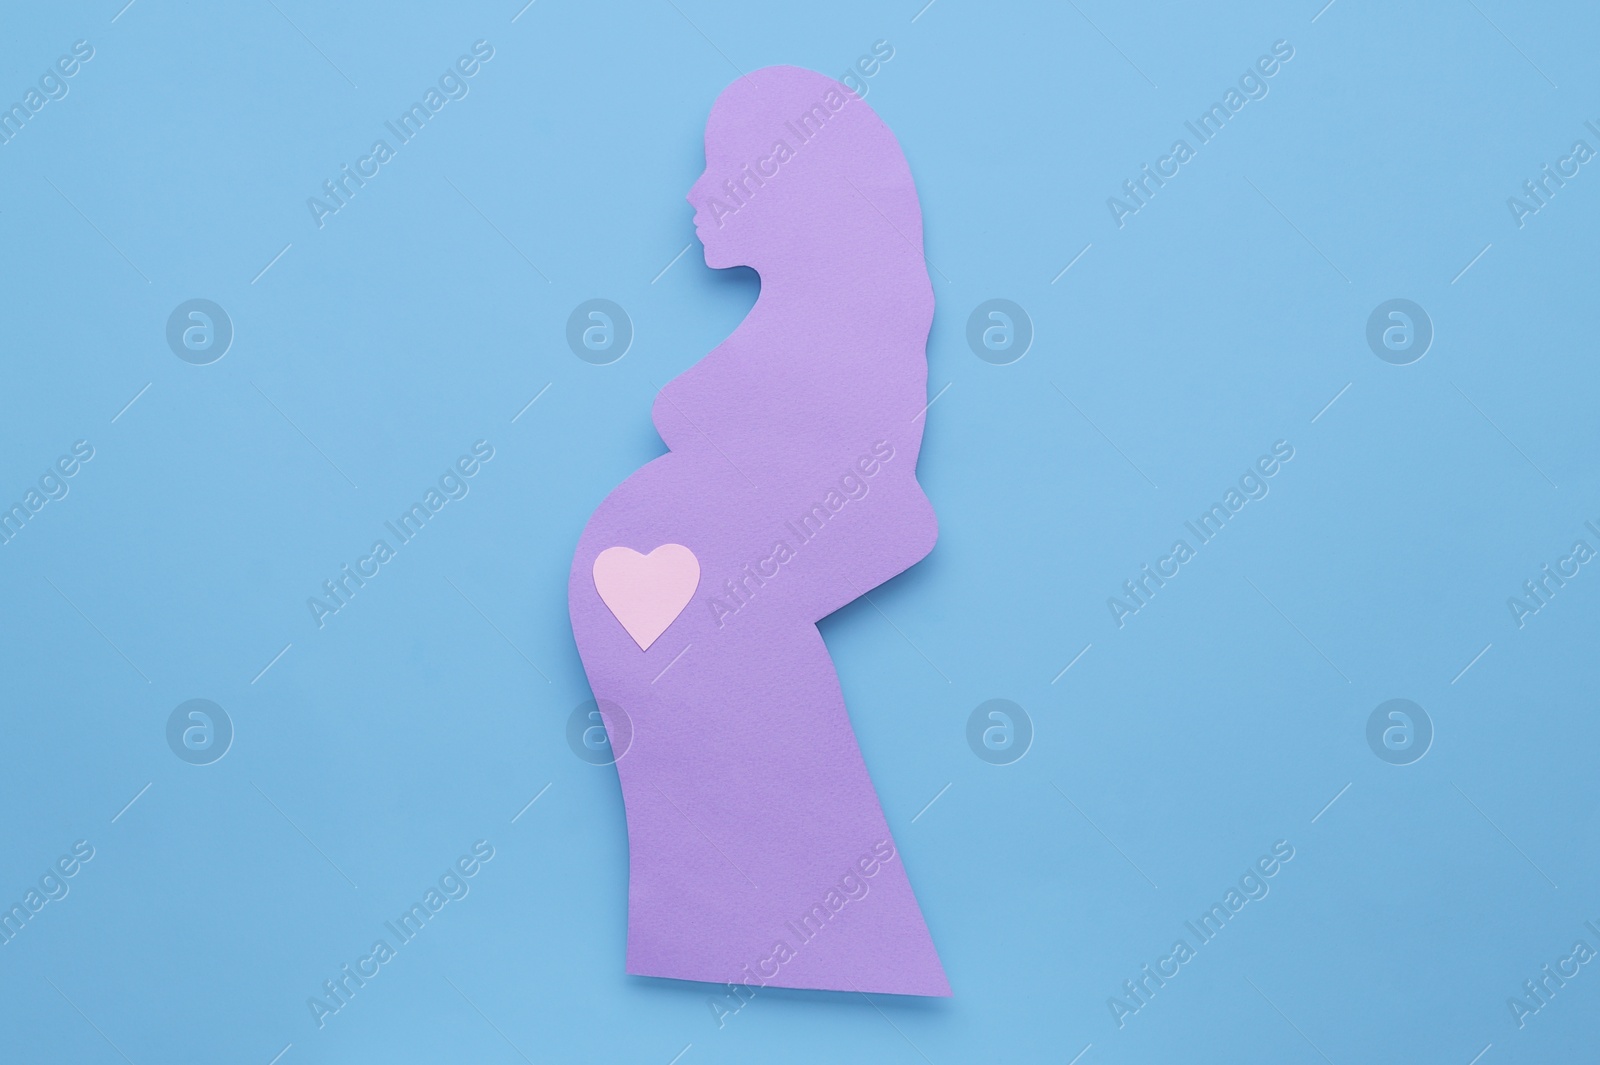 Photo of Pregnant woman with heart on belly on light blue background, top view